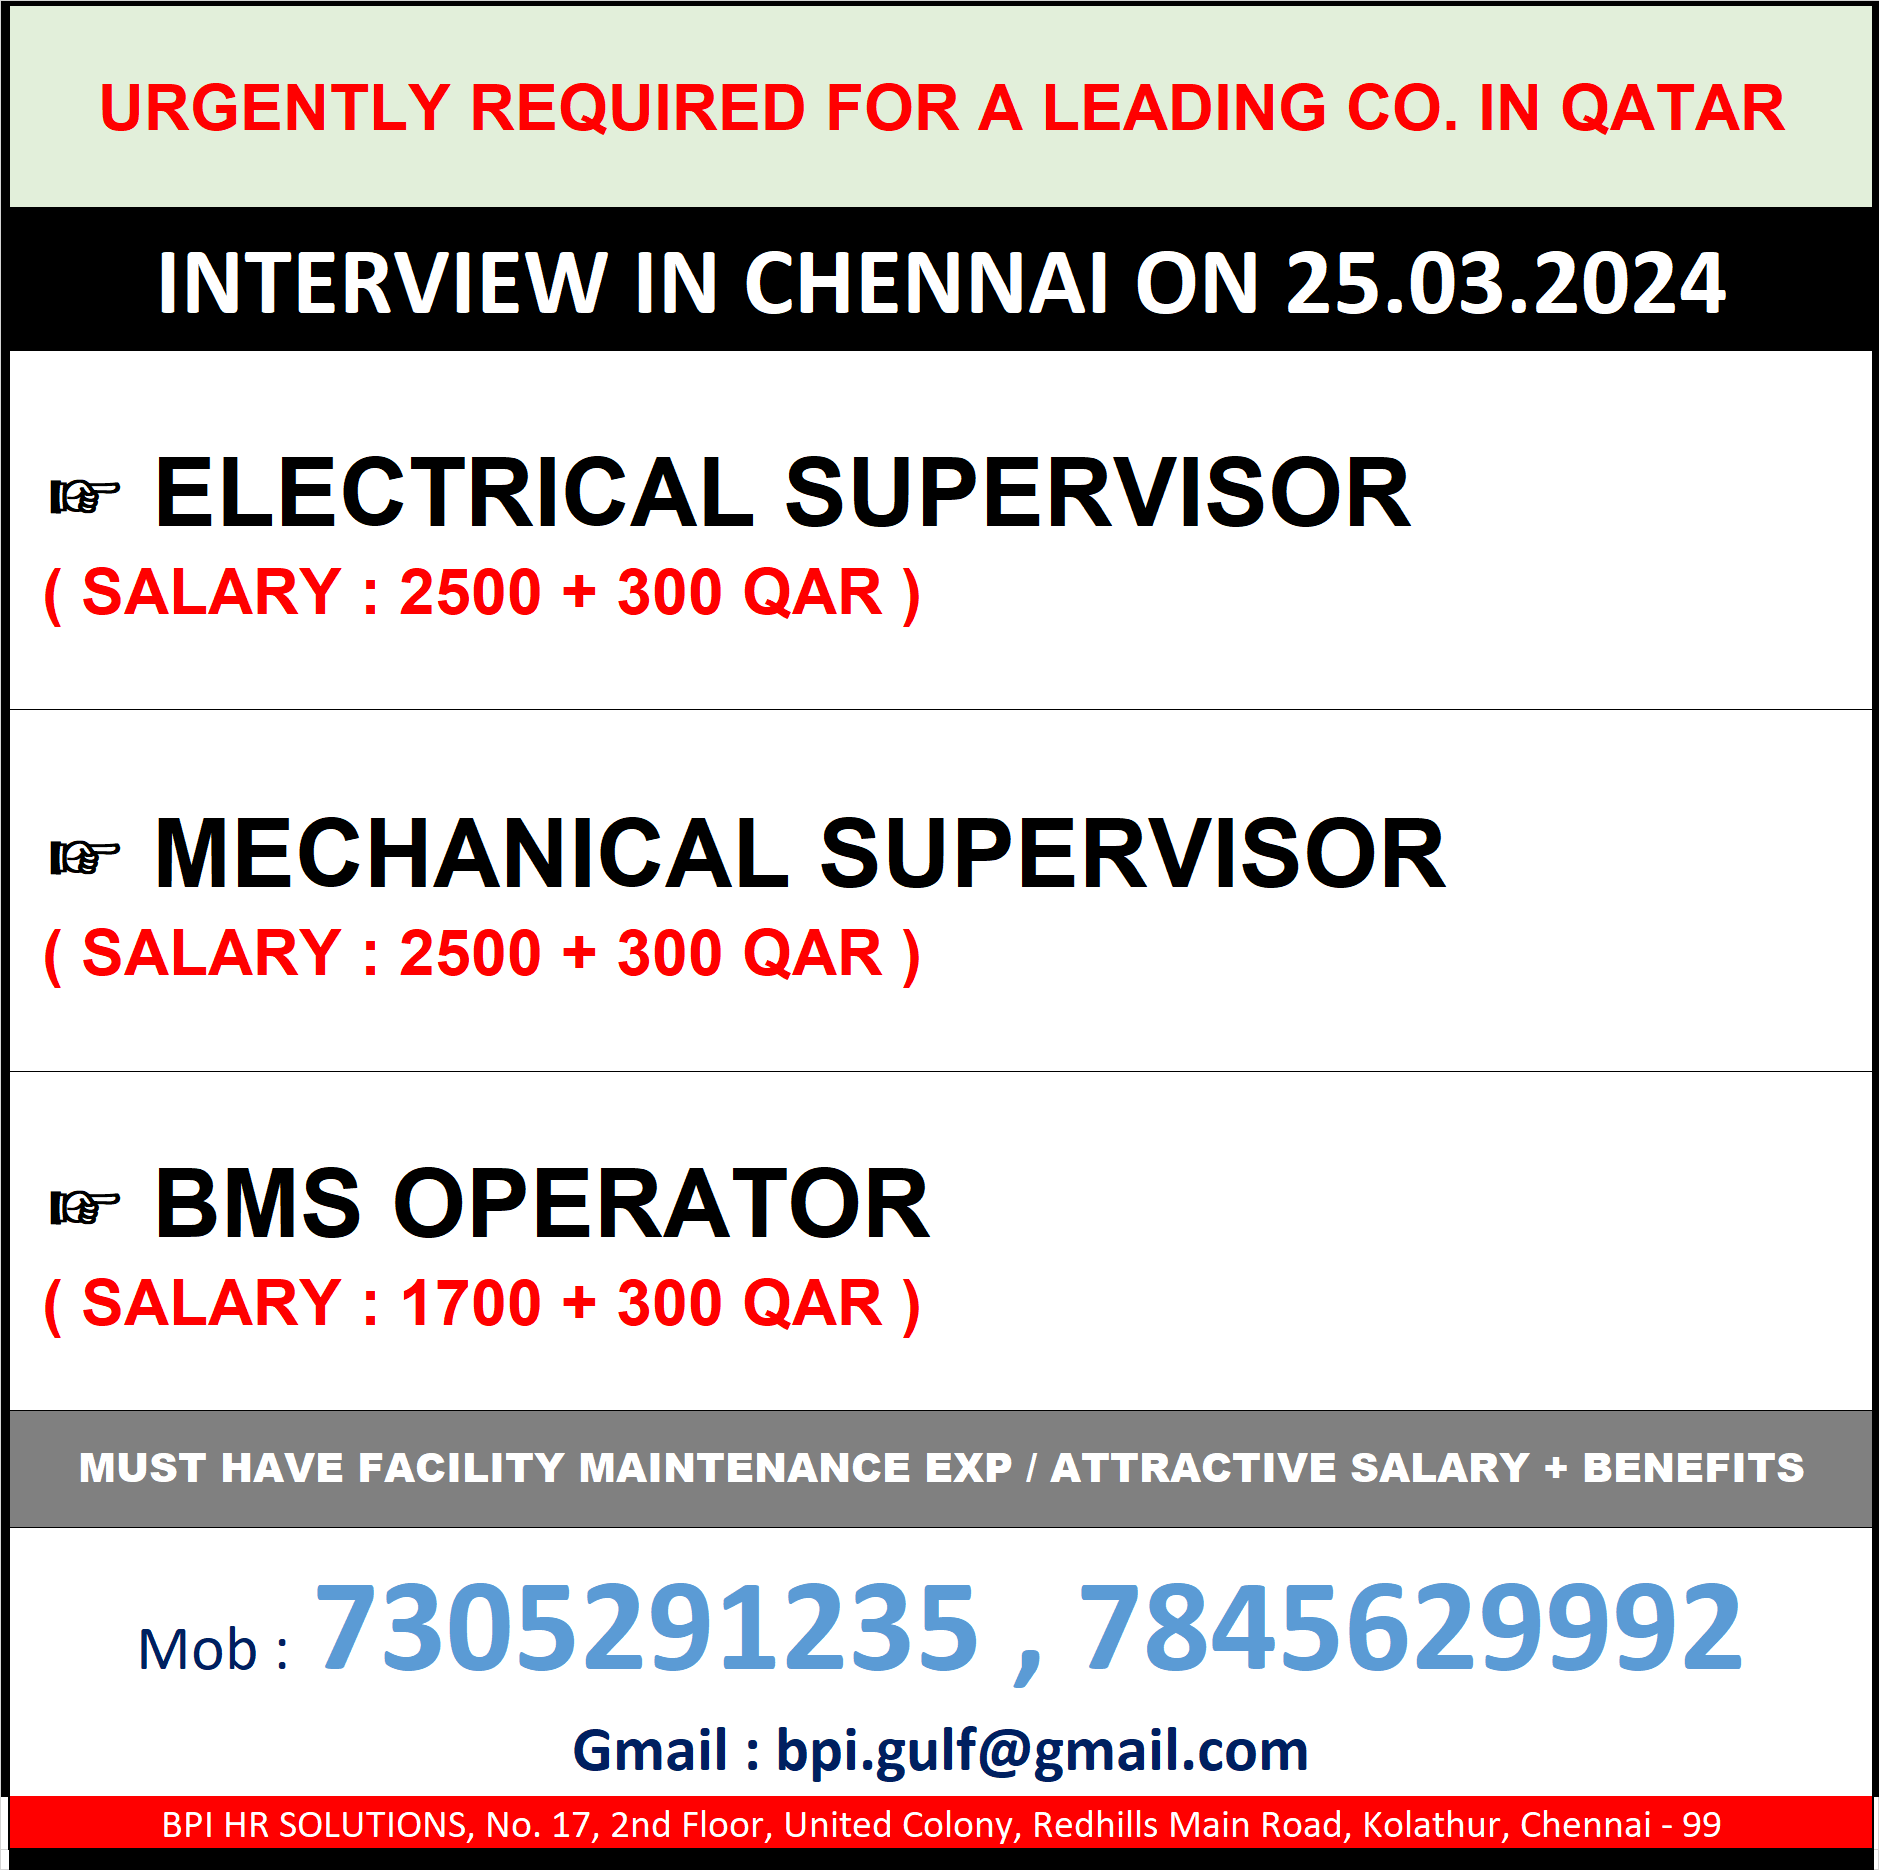 urgently required for a leading co. in qatar 25th interview in chennai